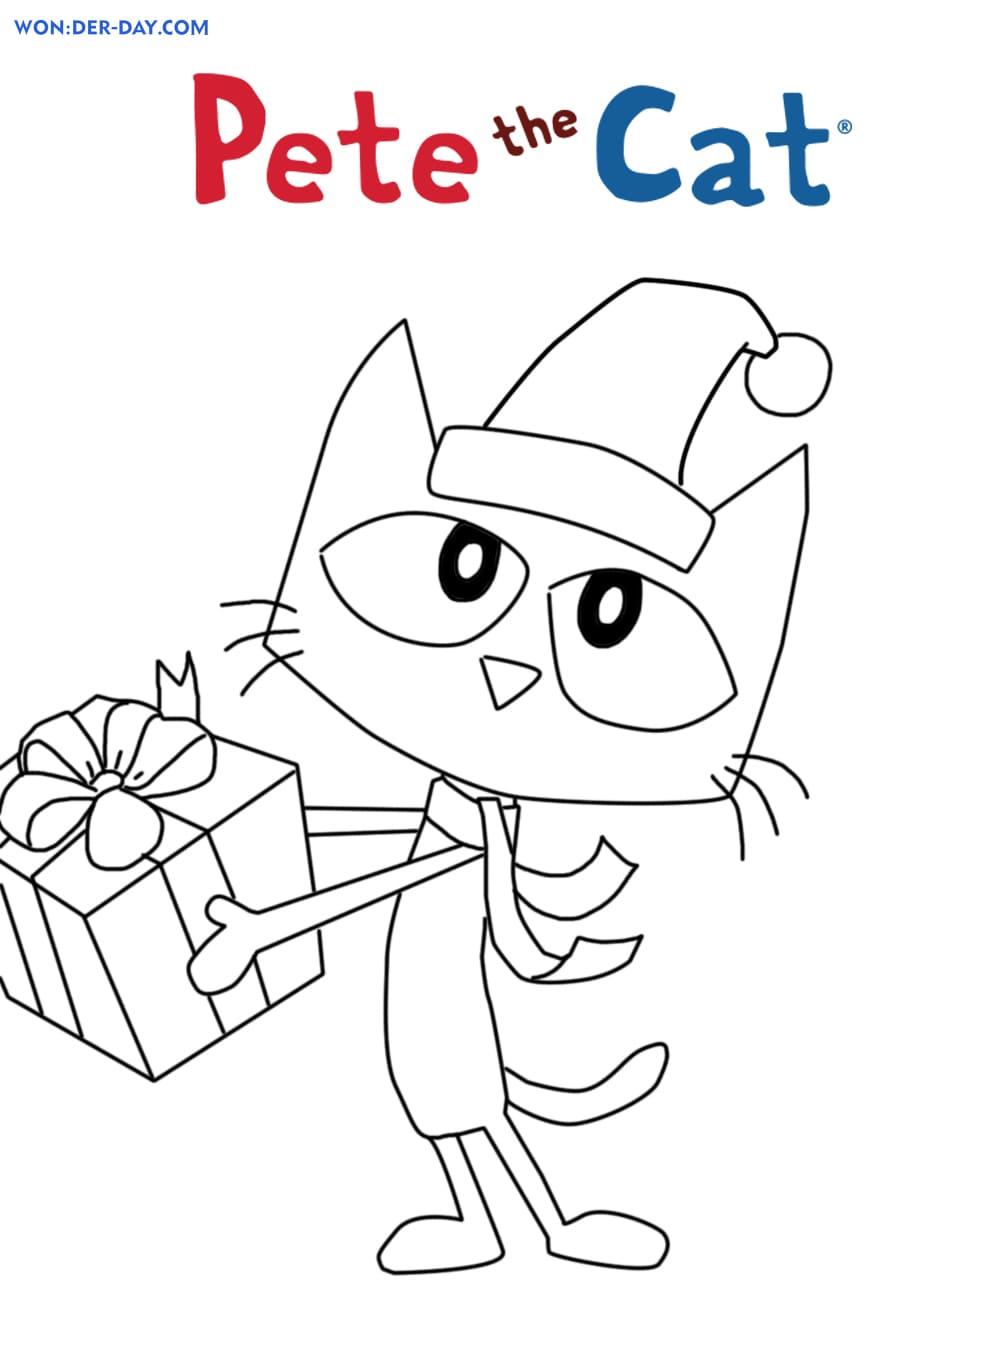 pete-the-cat-coloring-pages-free-coloring-pages-wonder-day-coloring-pages-for-children-and